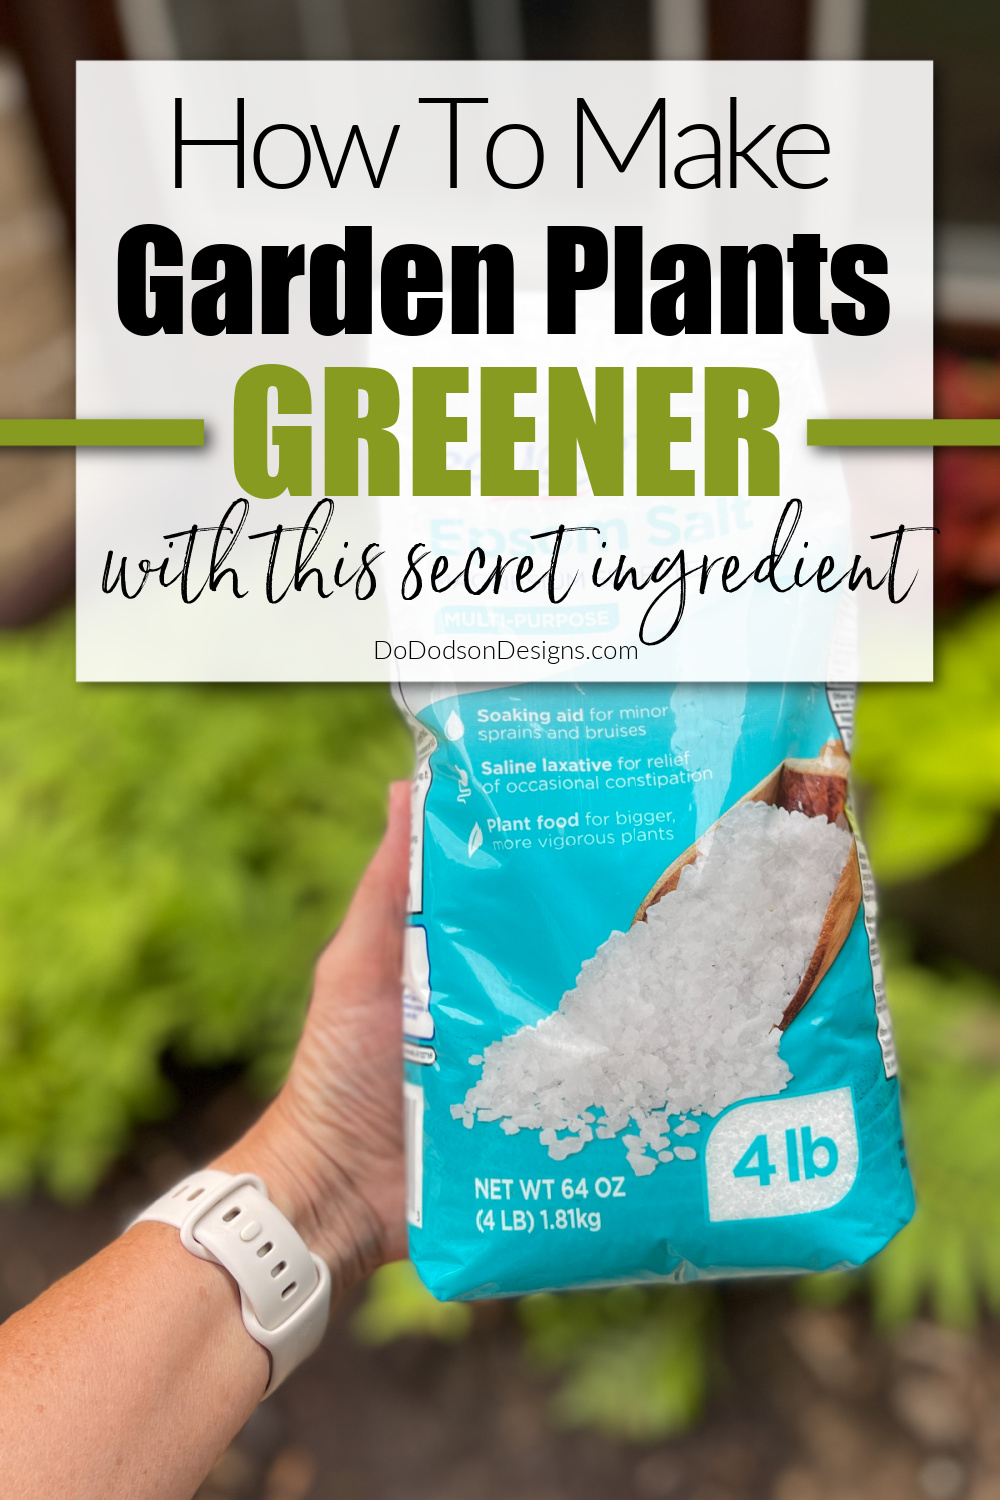 The Secret Ingredient To Get Your Plants Looking Greener Than Ever